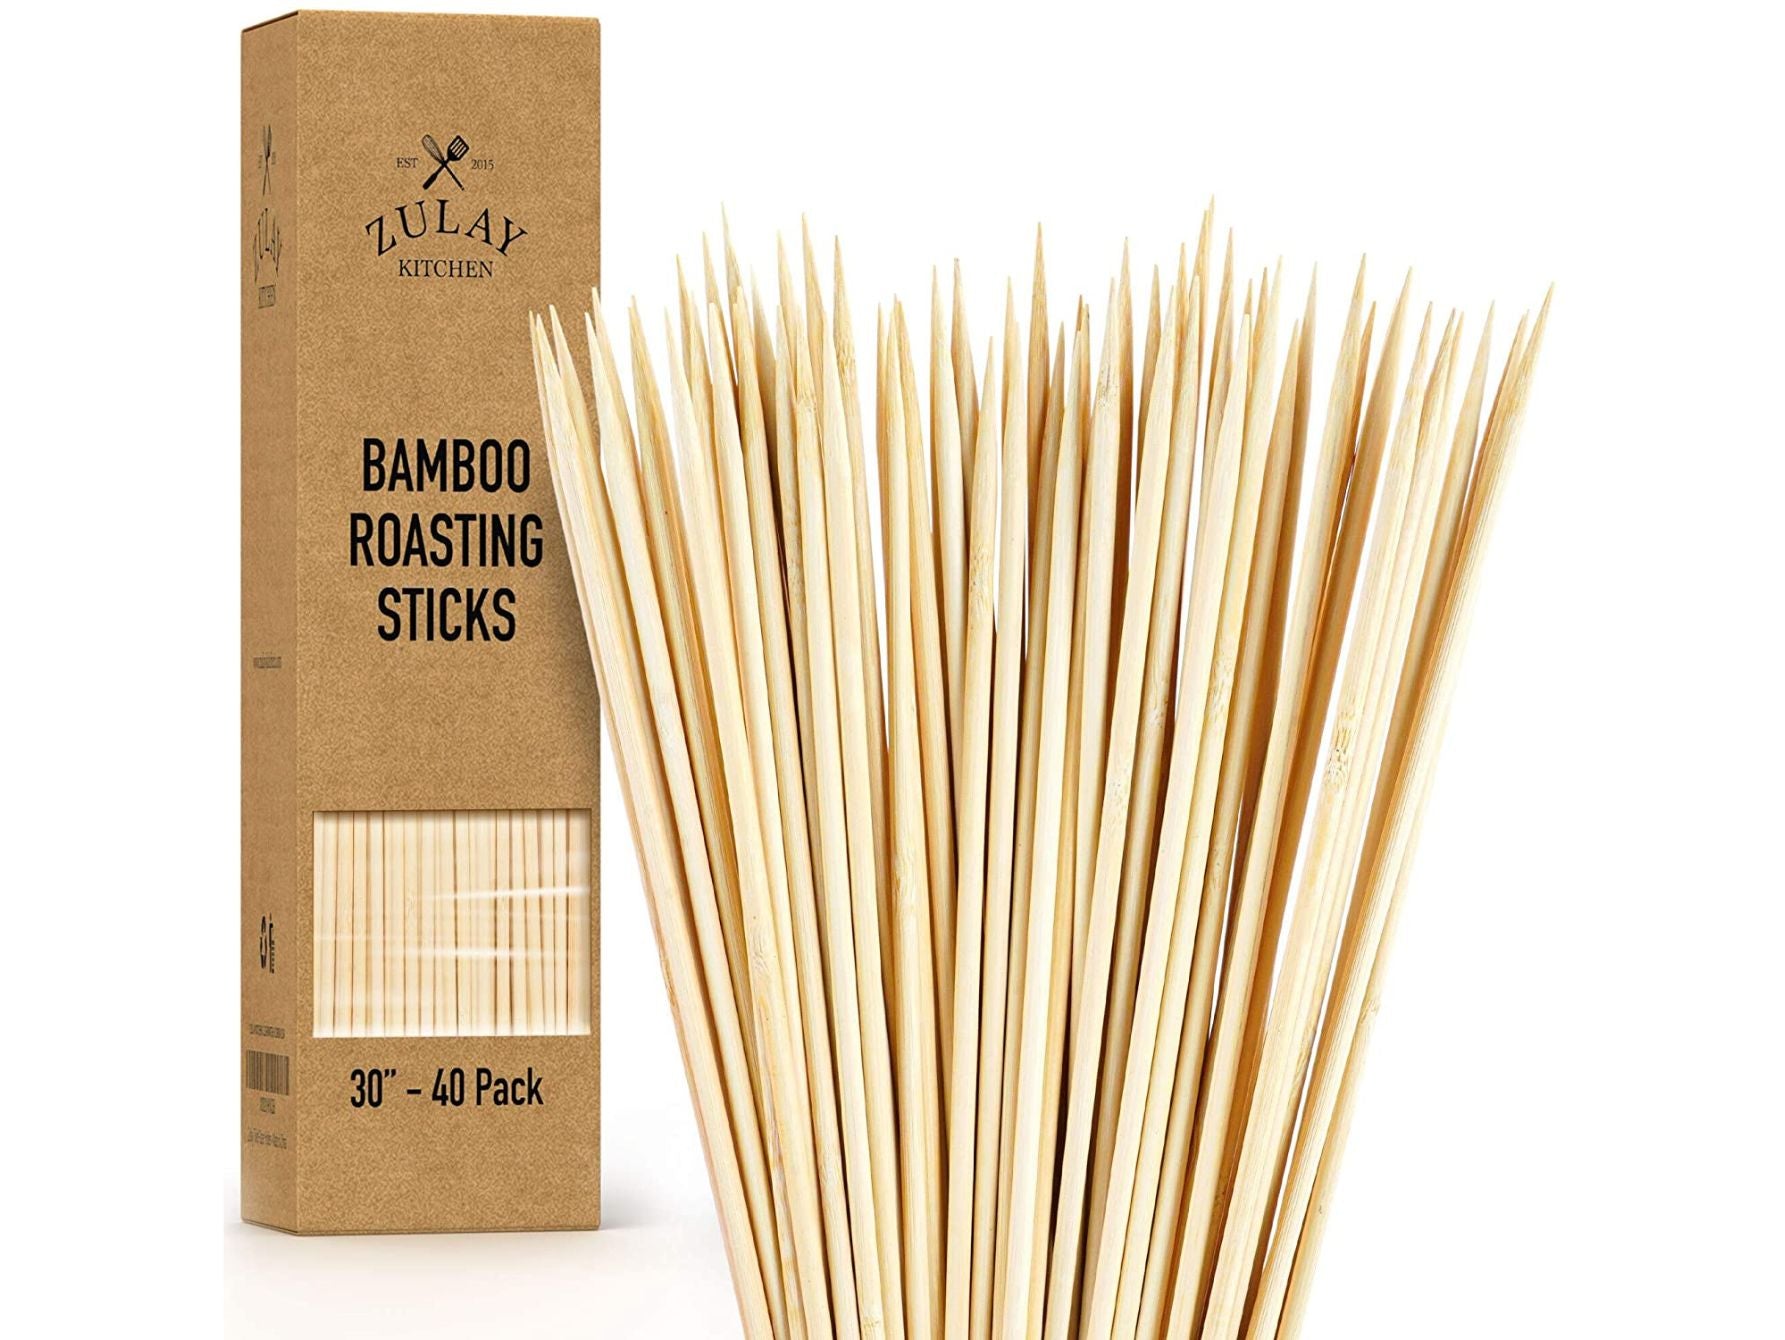 Bamboo skewers by Zulay Kitchen